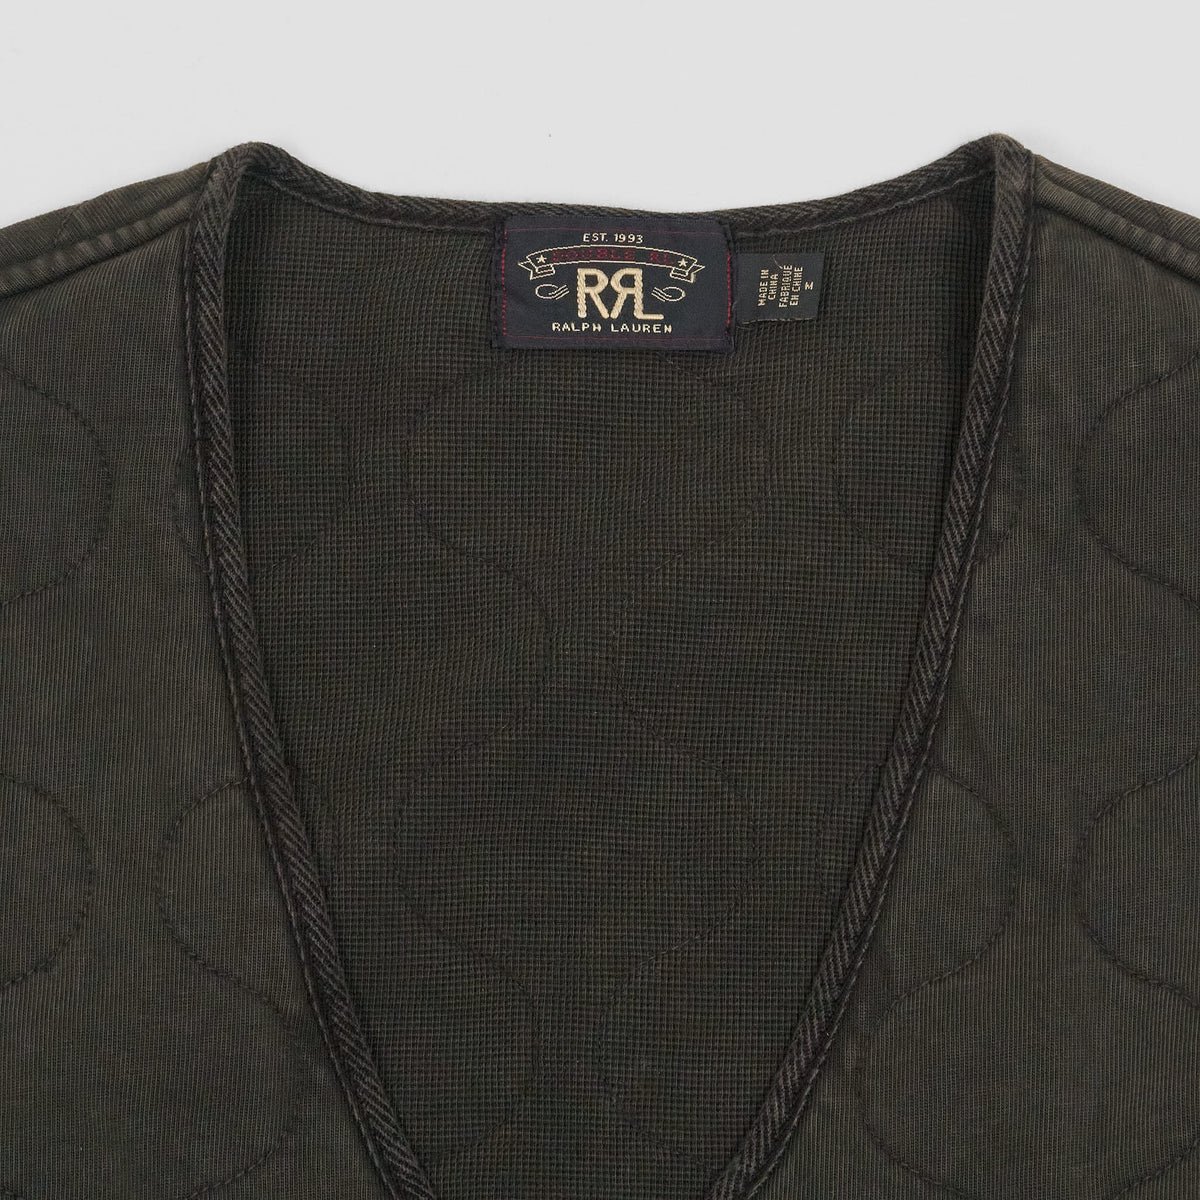 Double RL Quilted Cotton Vest